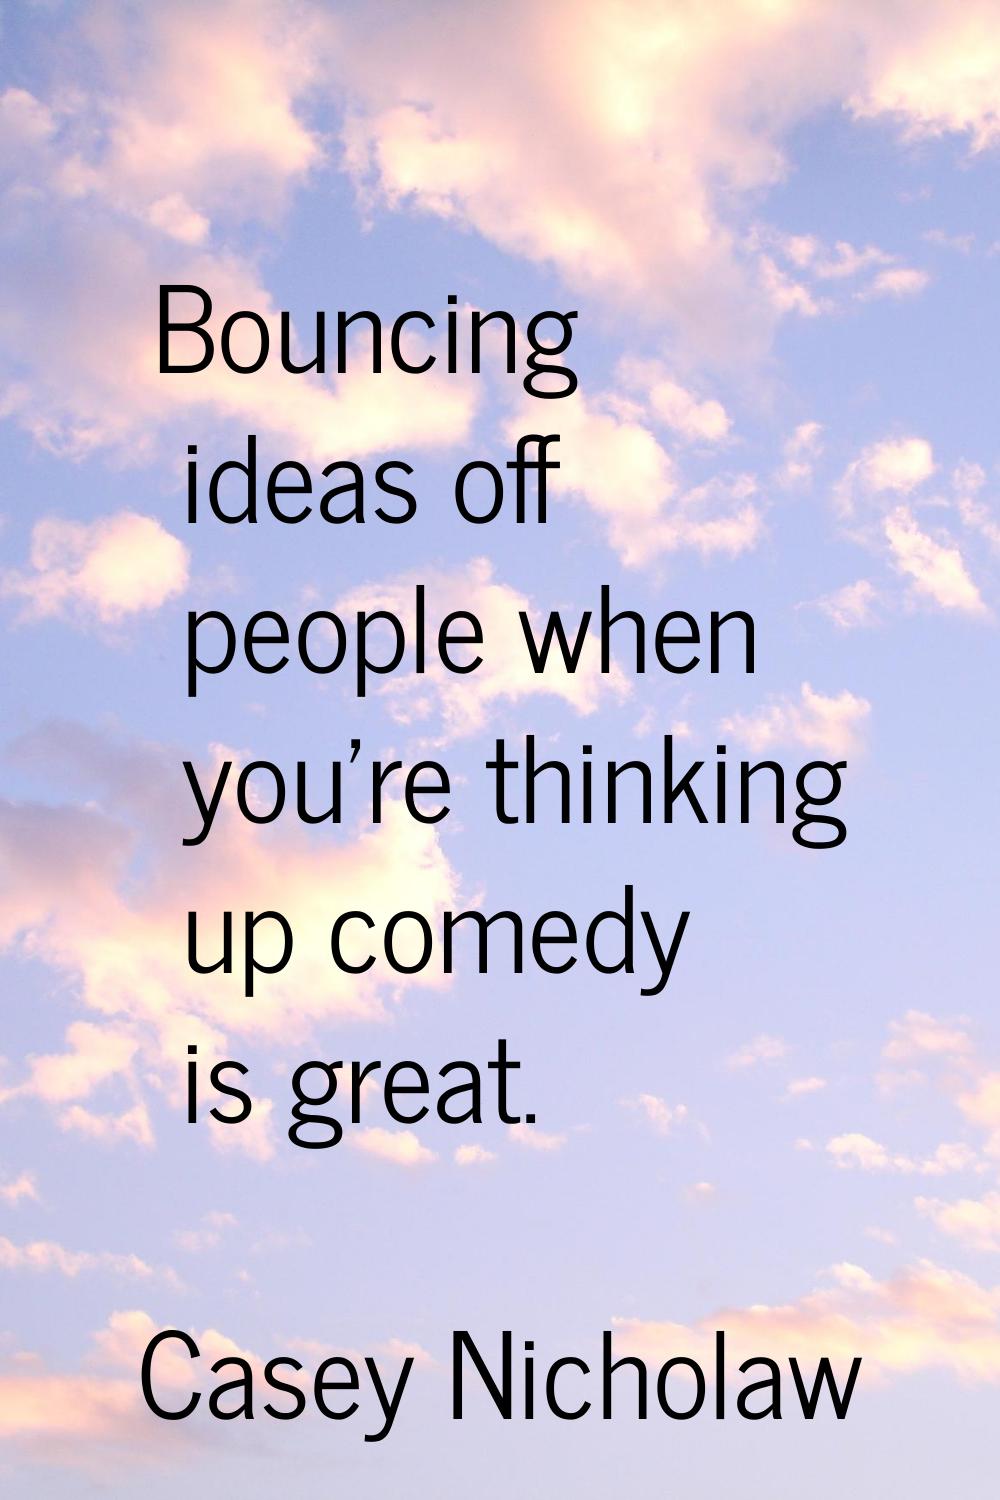 Bouncing ideas off people when you're thinking up comedy is great.